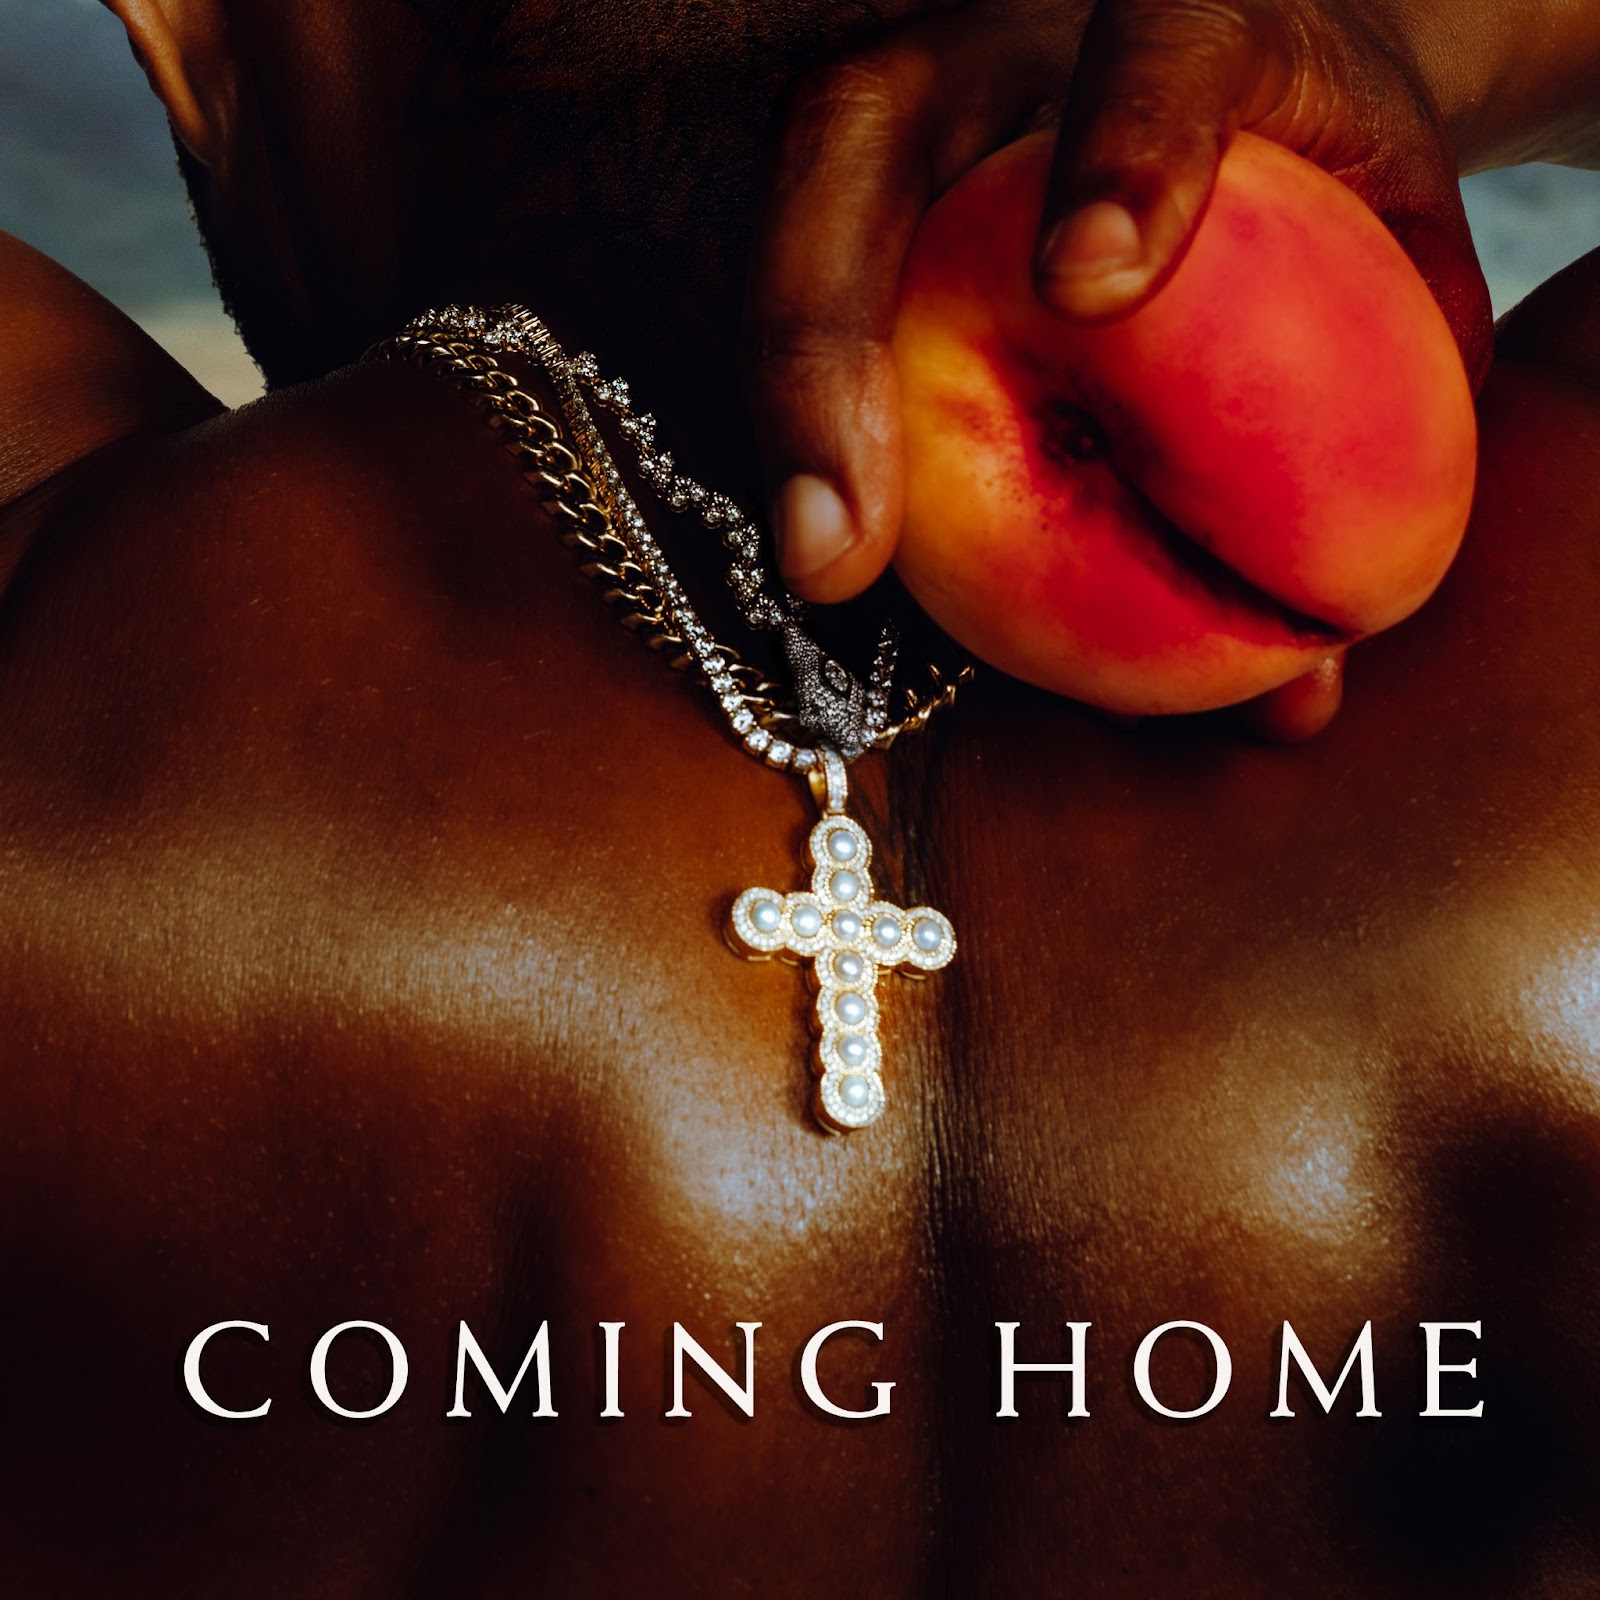 Usher Announces Release of Ninth Album ‘COMING HOME’